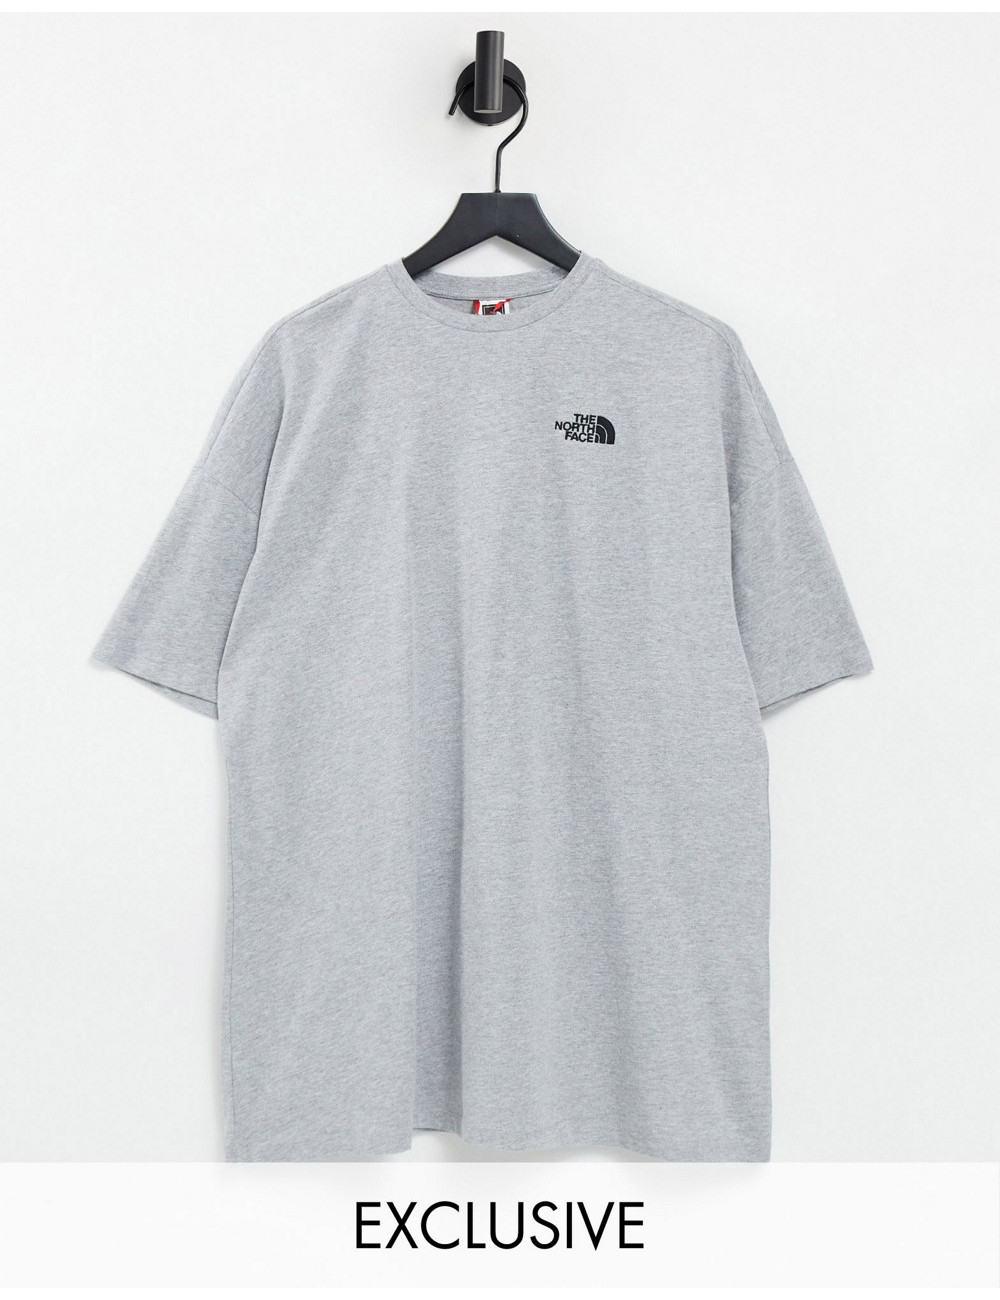 The North Face T-shirt...